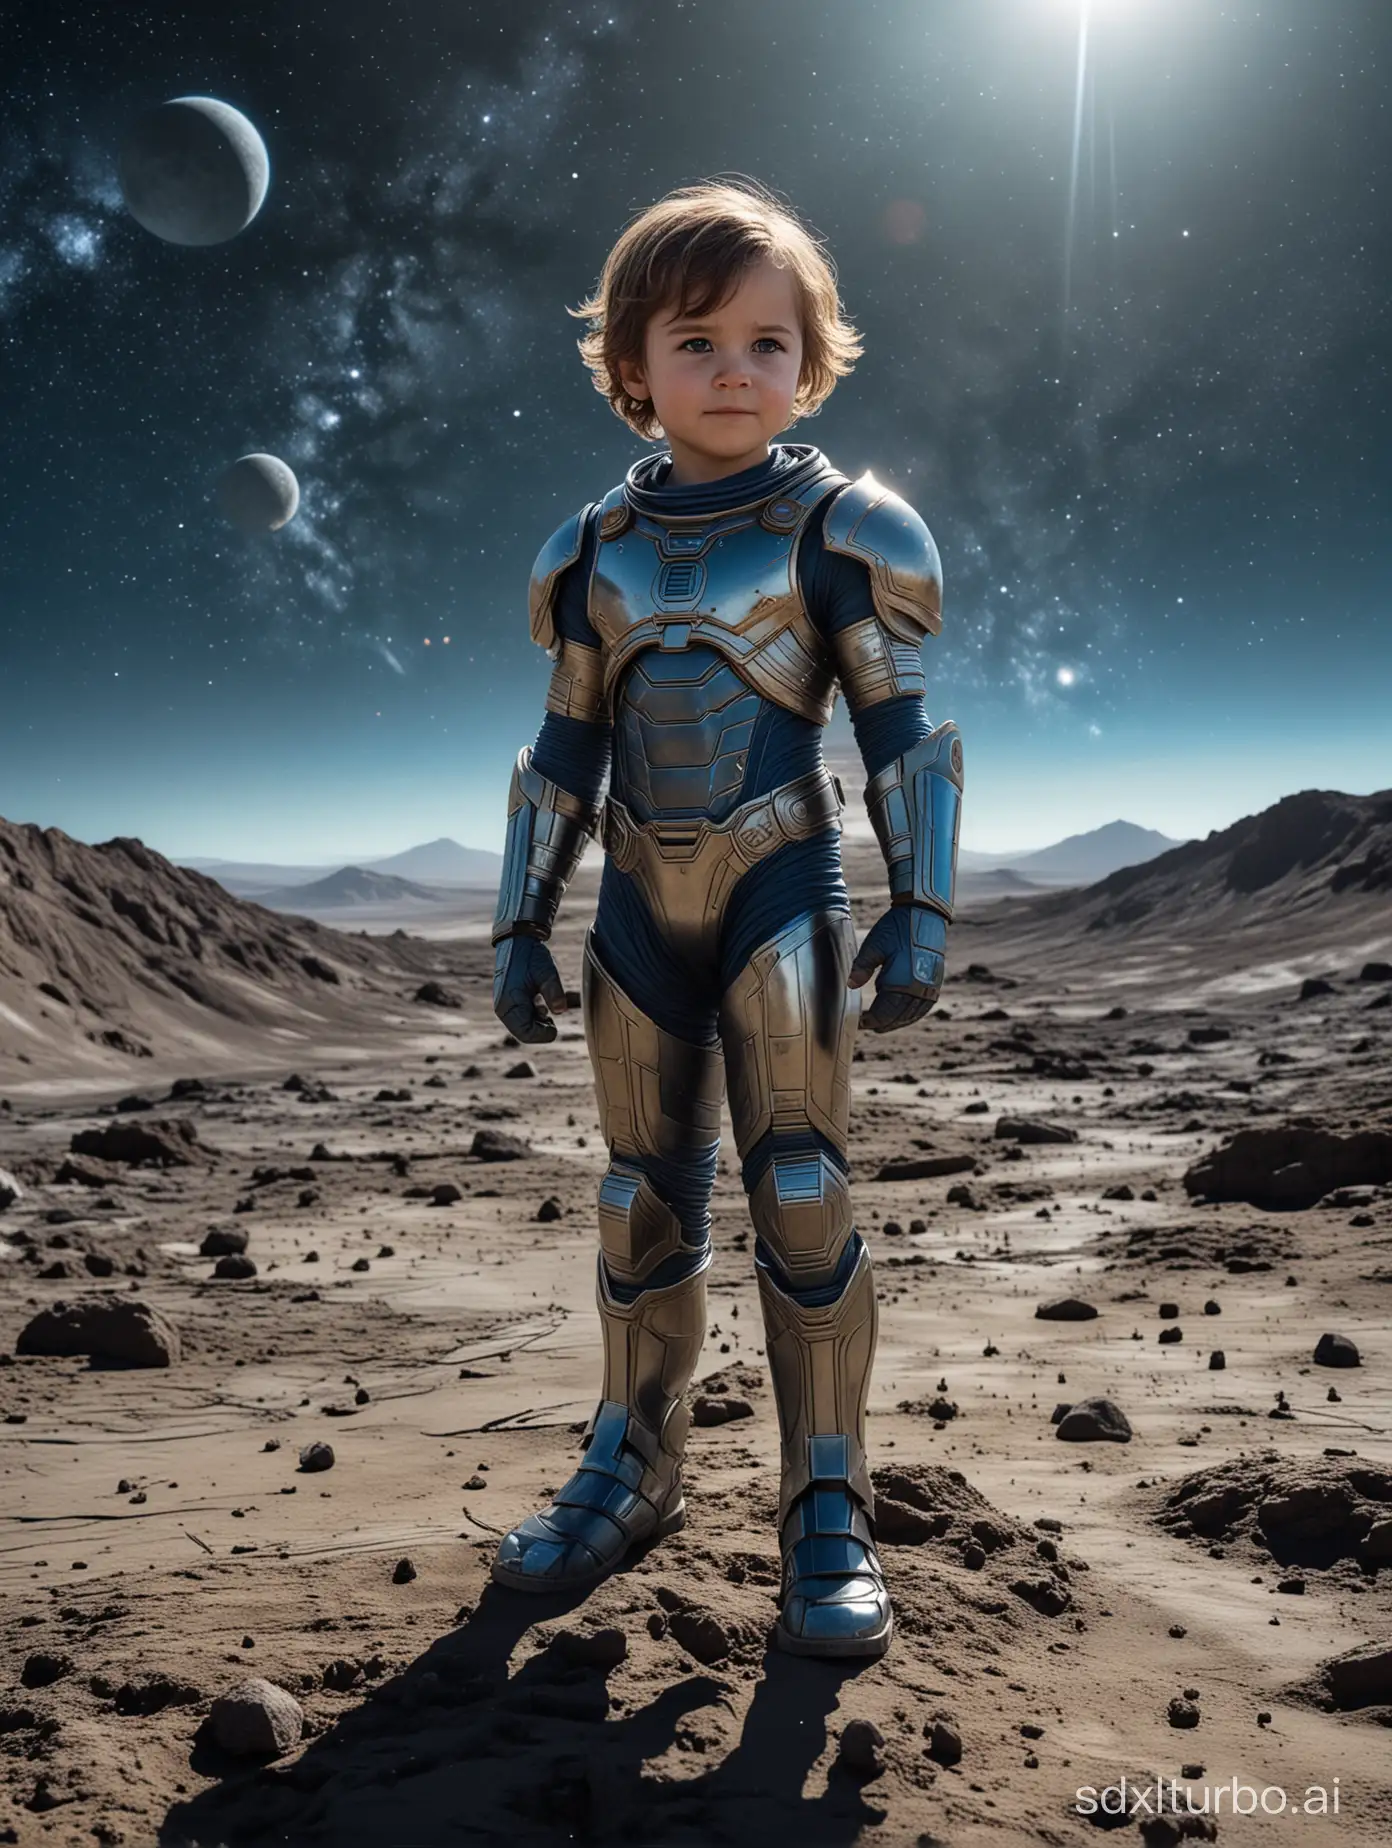 A child, full-body, facing the camera, able to see the facial features and hair, transforms into a Marvel hero wearing armor standing on the surface of the moon, with a blue planet behind, the Milky Way galaxy faintly visible, slightly dark